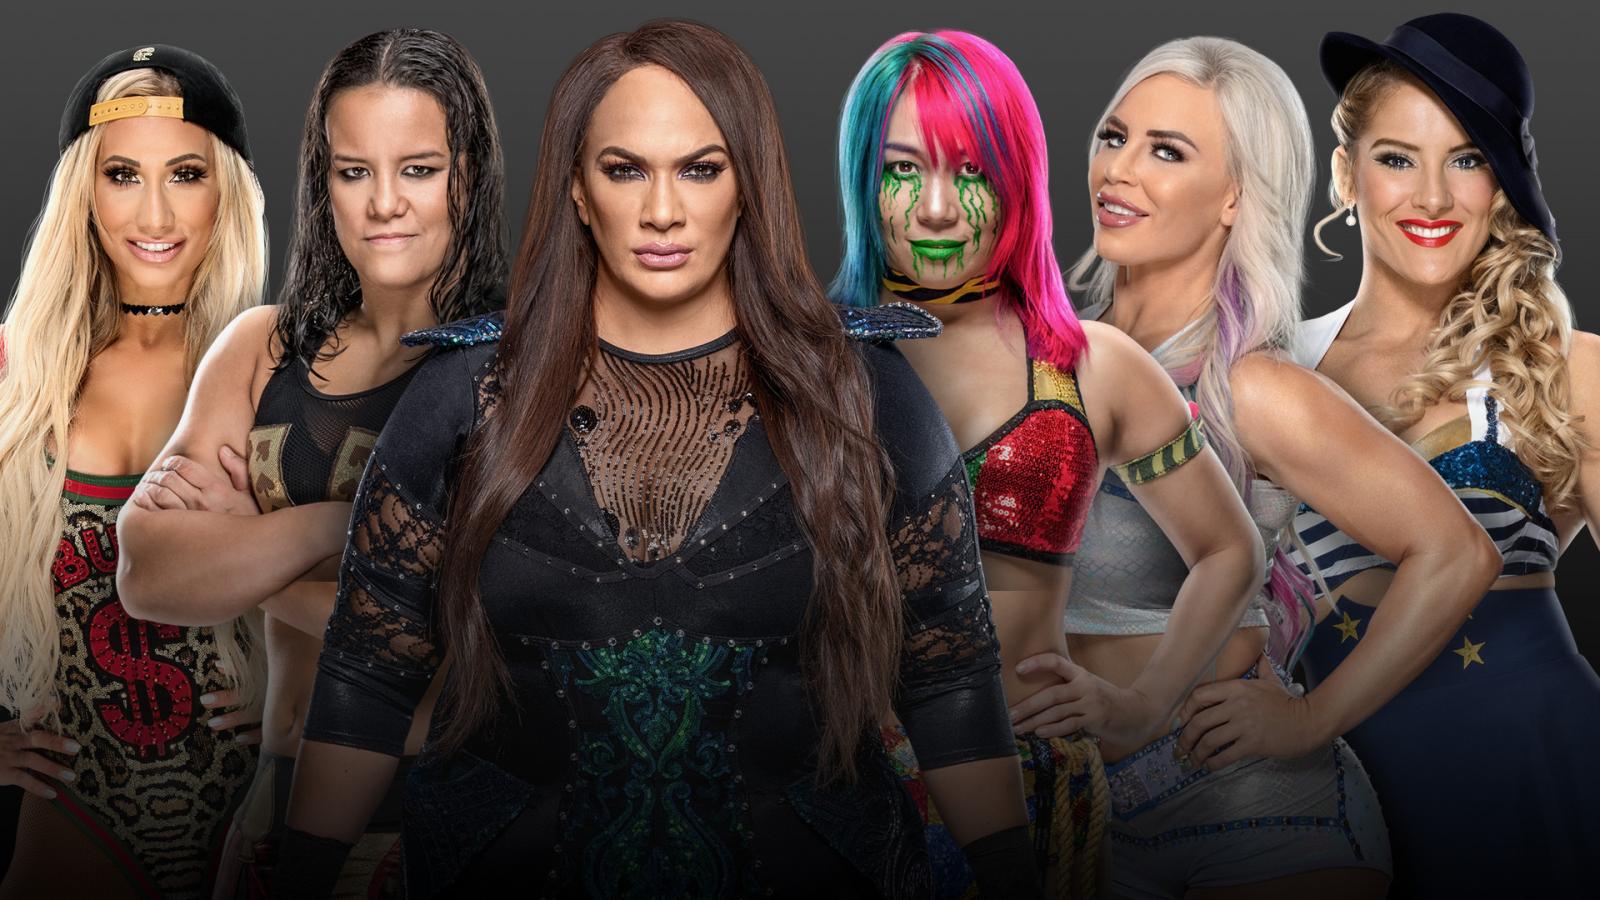 Women's Money In The Bank 2020 Match Participants